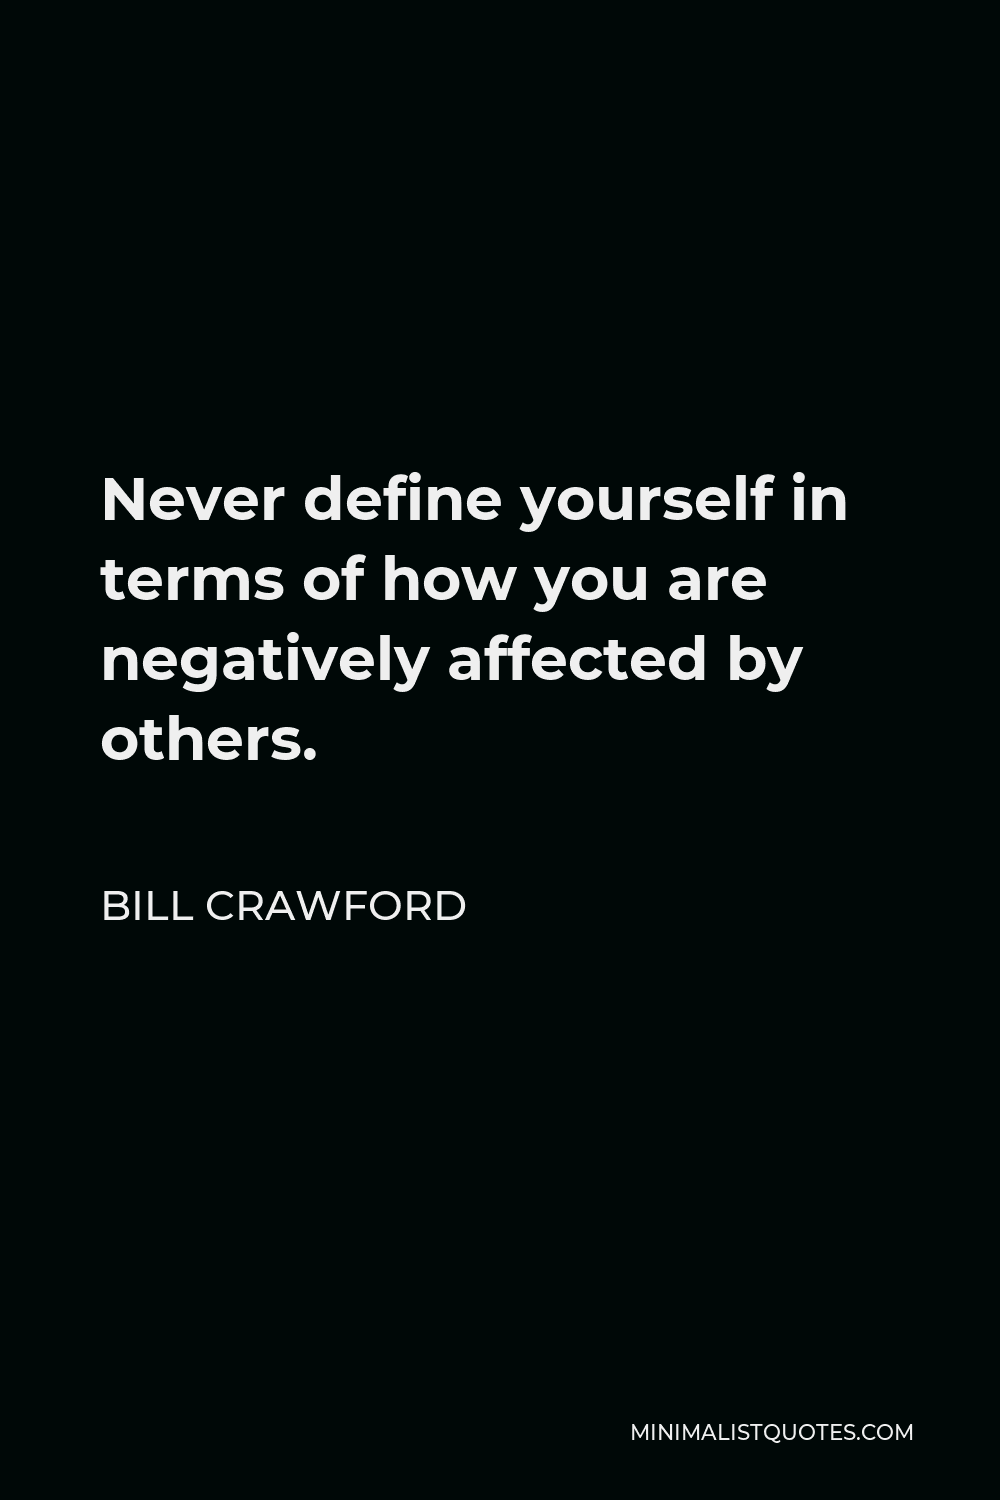 Bill Crawford Quote - Never define yourself in terms of how you are negatively affected by others.